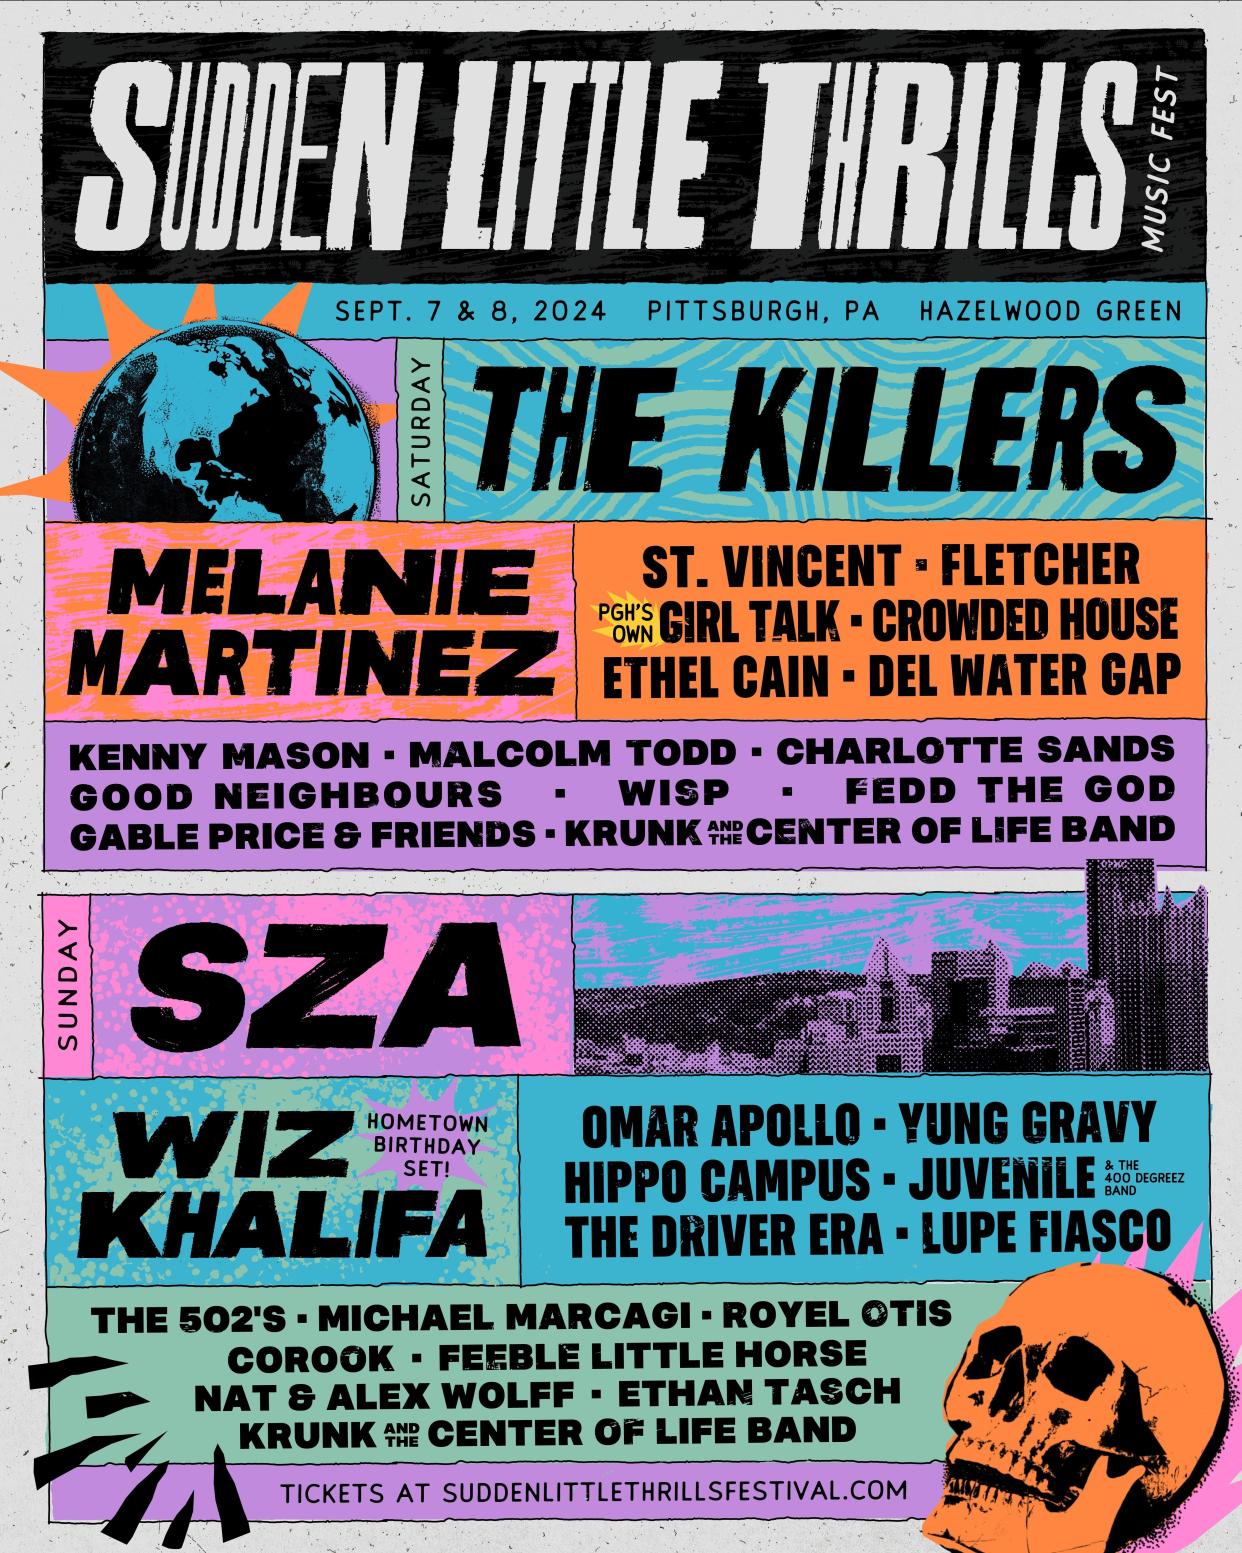 Poster for a new Pittsburgh concert festival, Sudden Little Thrills, with The Killers, SZA, Crowded House and more.